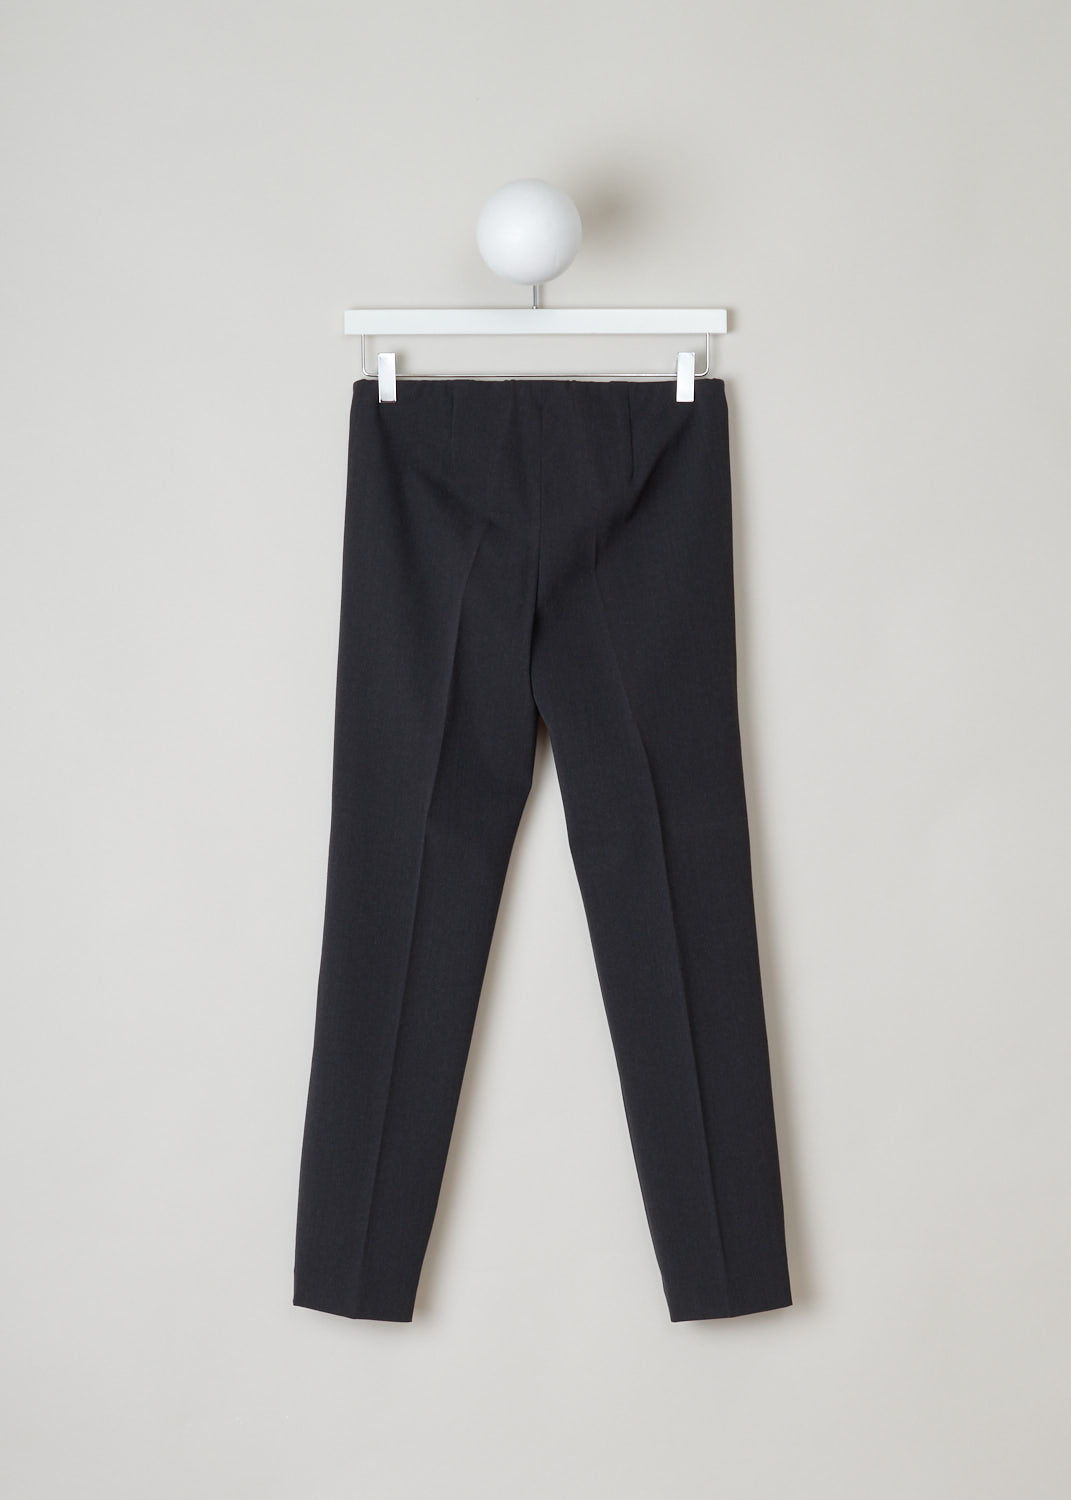 Brunello Cucinelli, straight charcoal pants, MA051P1794_C004, grey, back, Empower your outfit with these minimalistic designed pants. Comes in a lightweight wool in charcoal grey and midnight blue. These low-cut pants have a slim fit and slightly tapered legs.
A concealed elasticated waistband and closes with an invisible zip on the side.